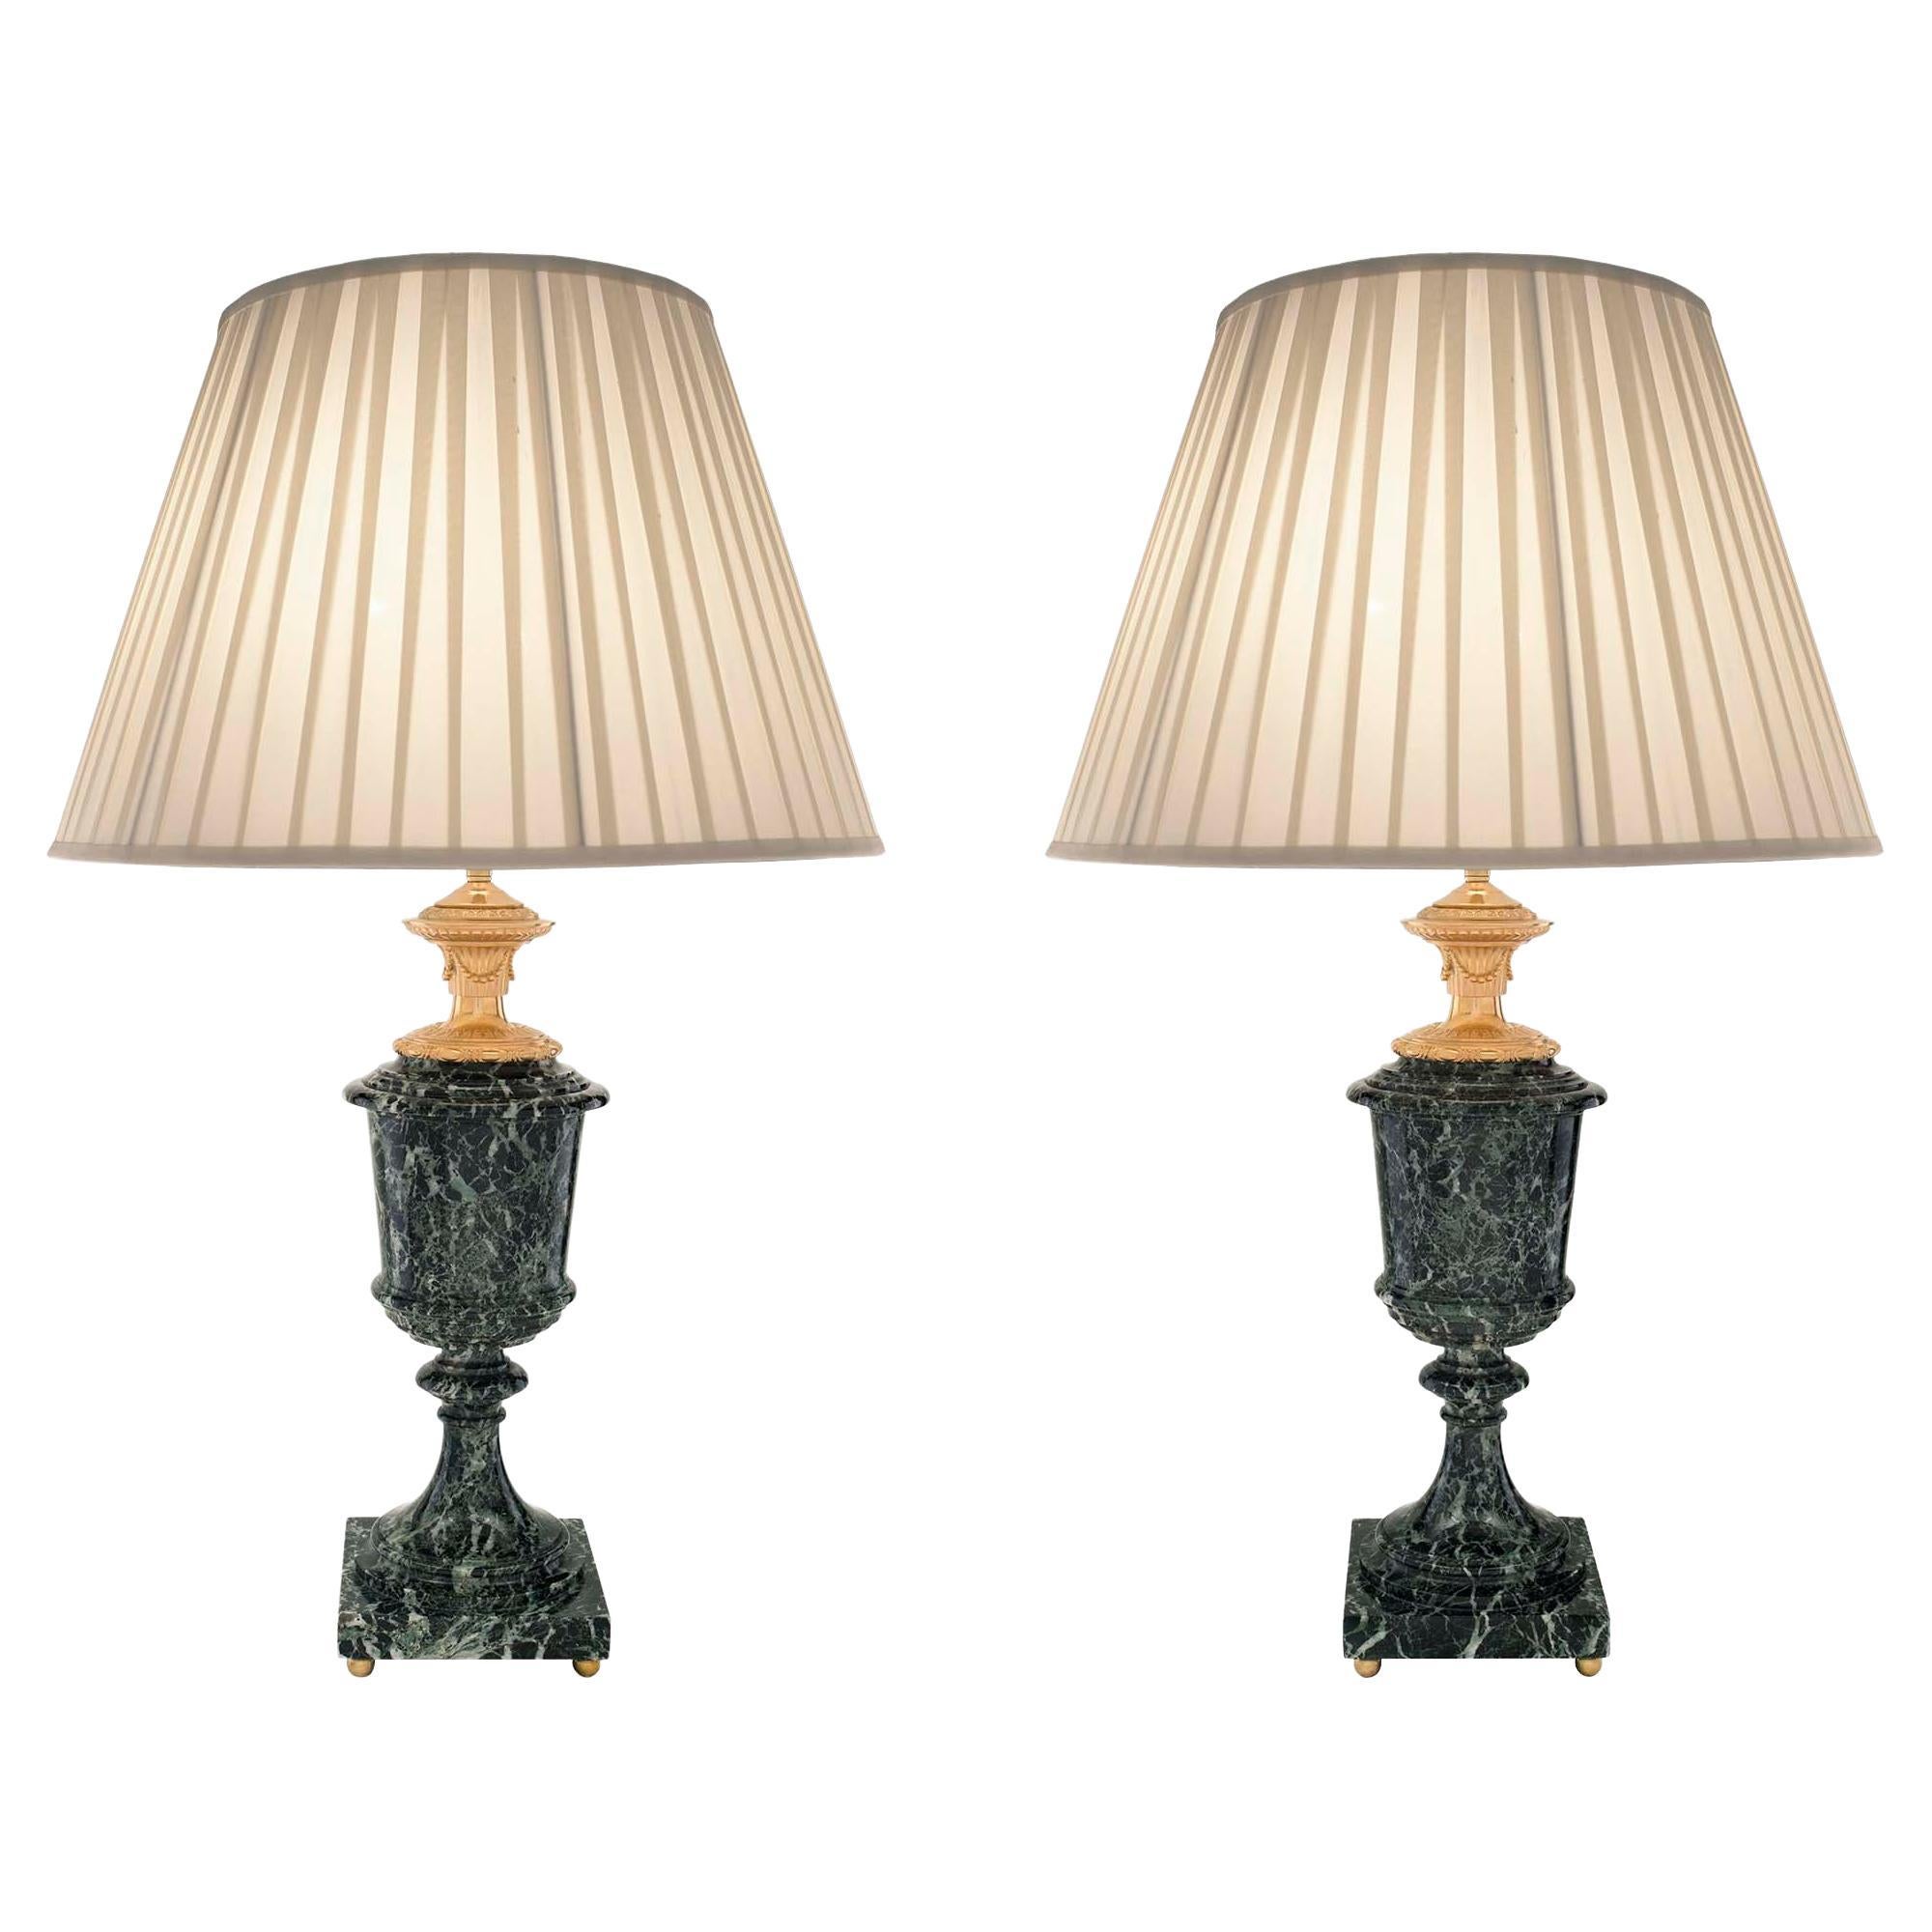 Pair of 19th Century Louis XVI Style Vert Patricia Marble and Ormolu Lamps